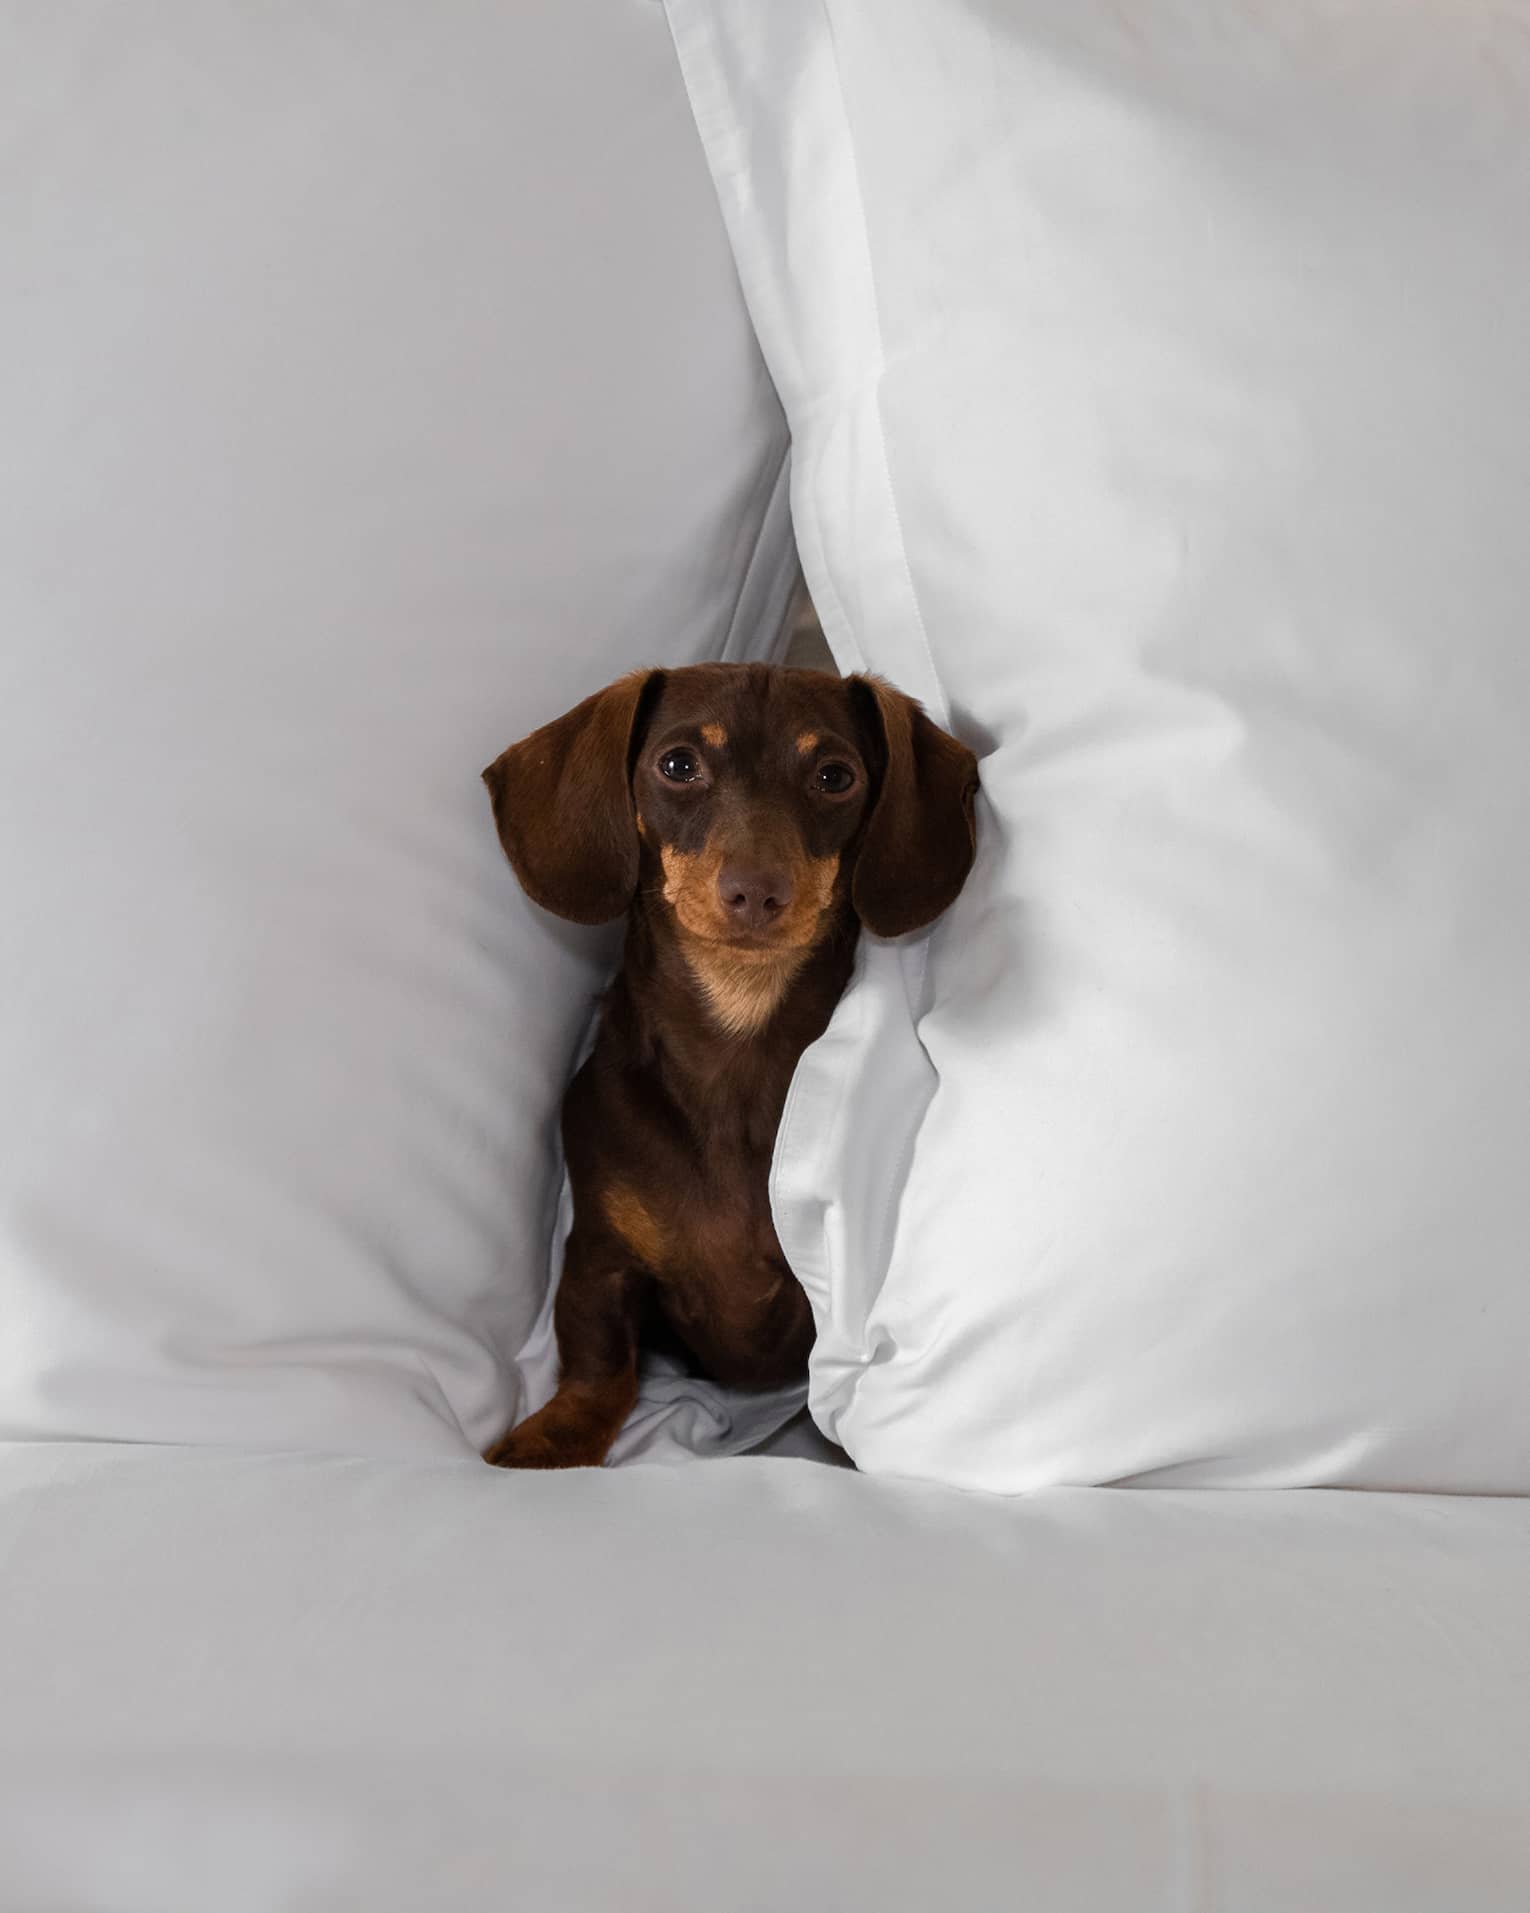 A small dog between two white pillows.